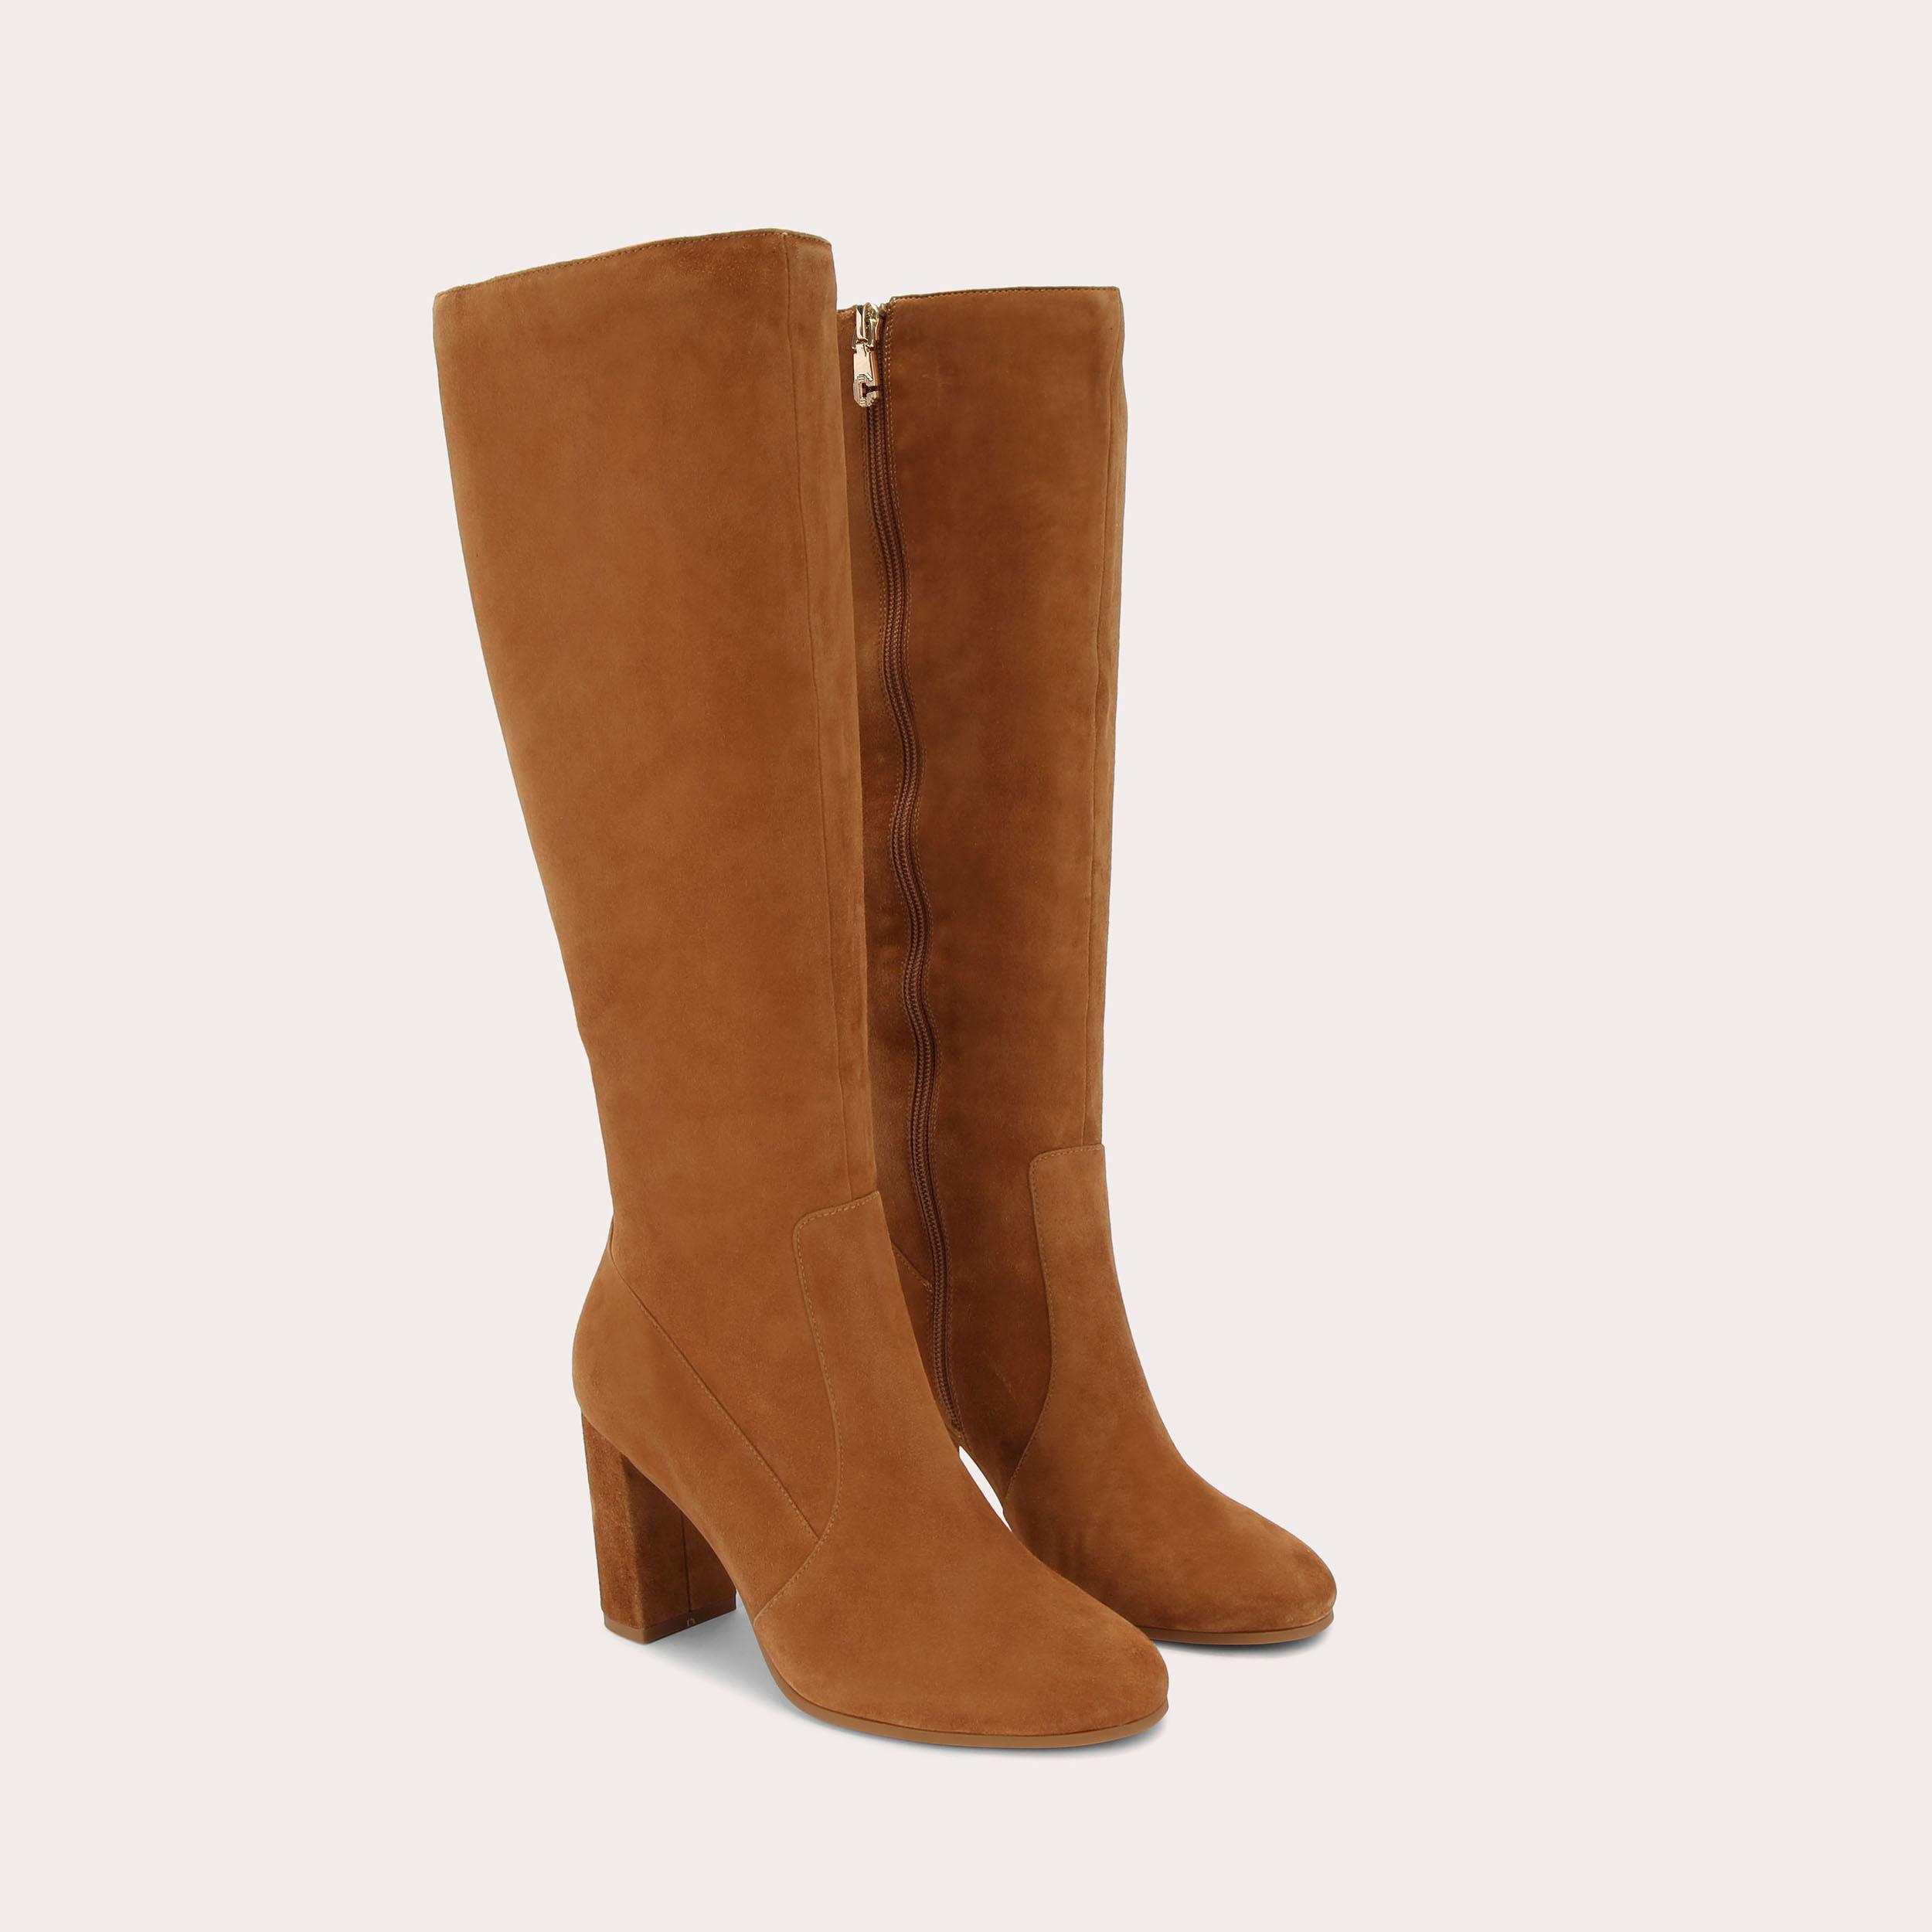 POSE KNEE HIGH Tan Suede Knee High Boot by CARVELA